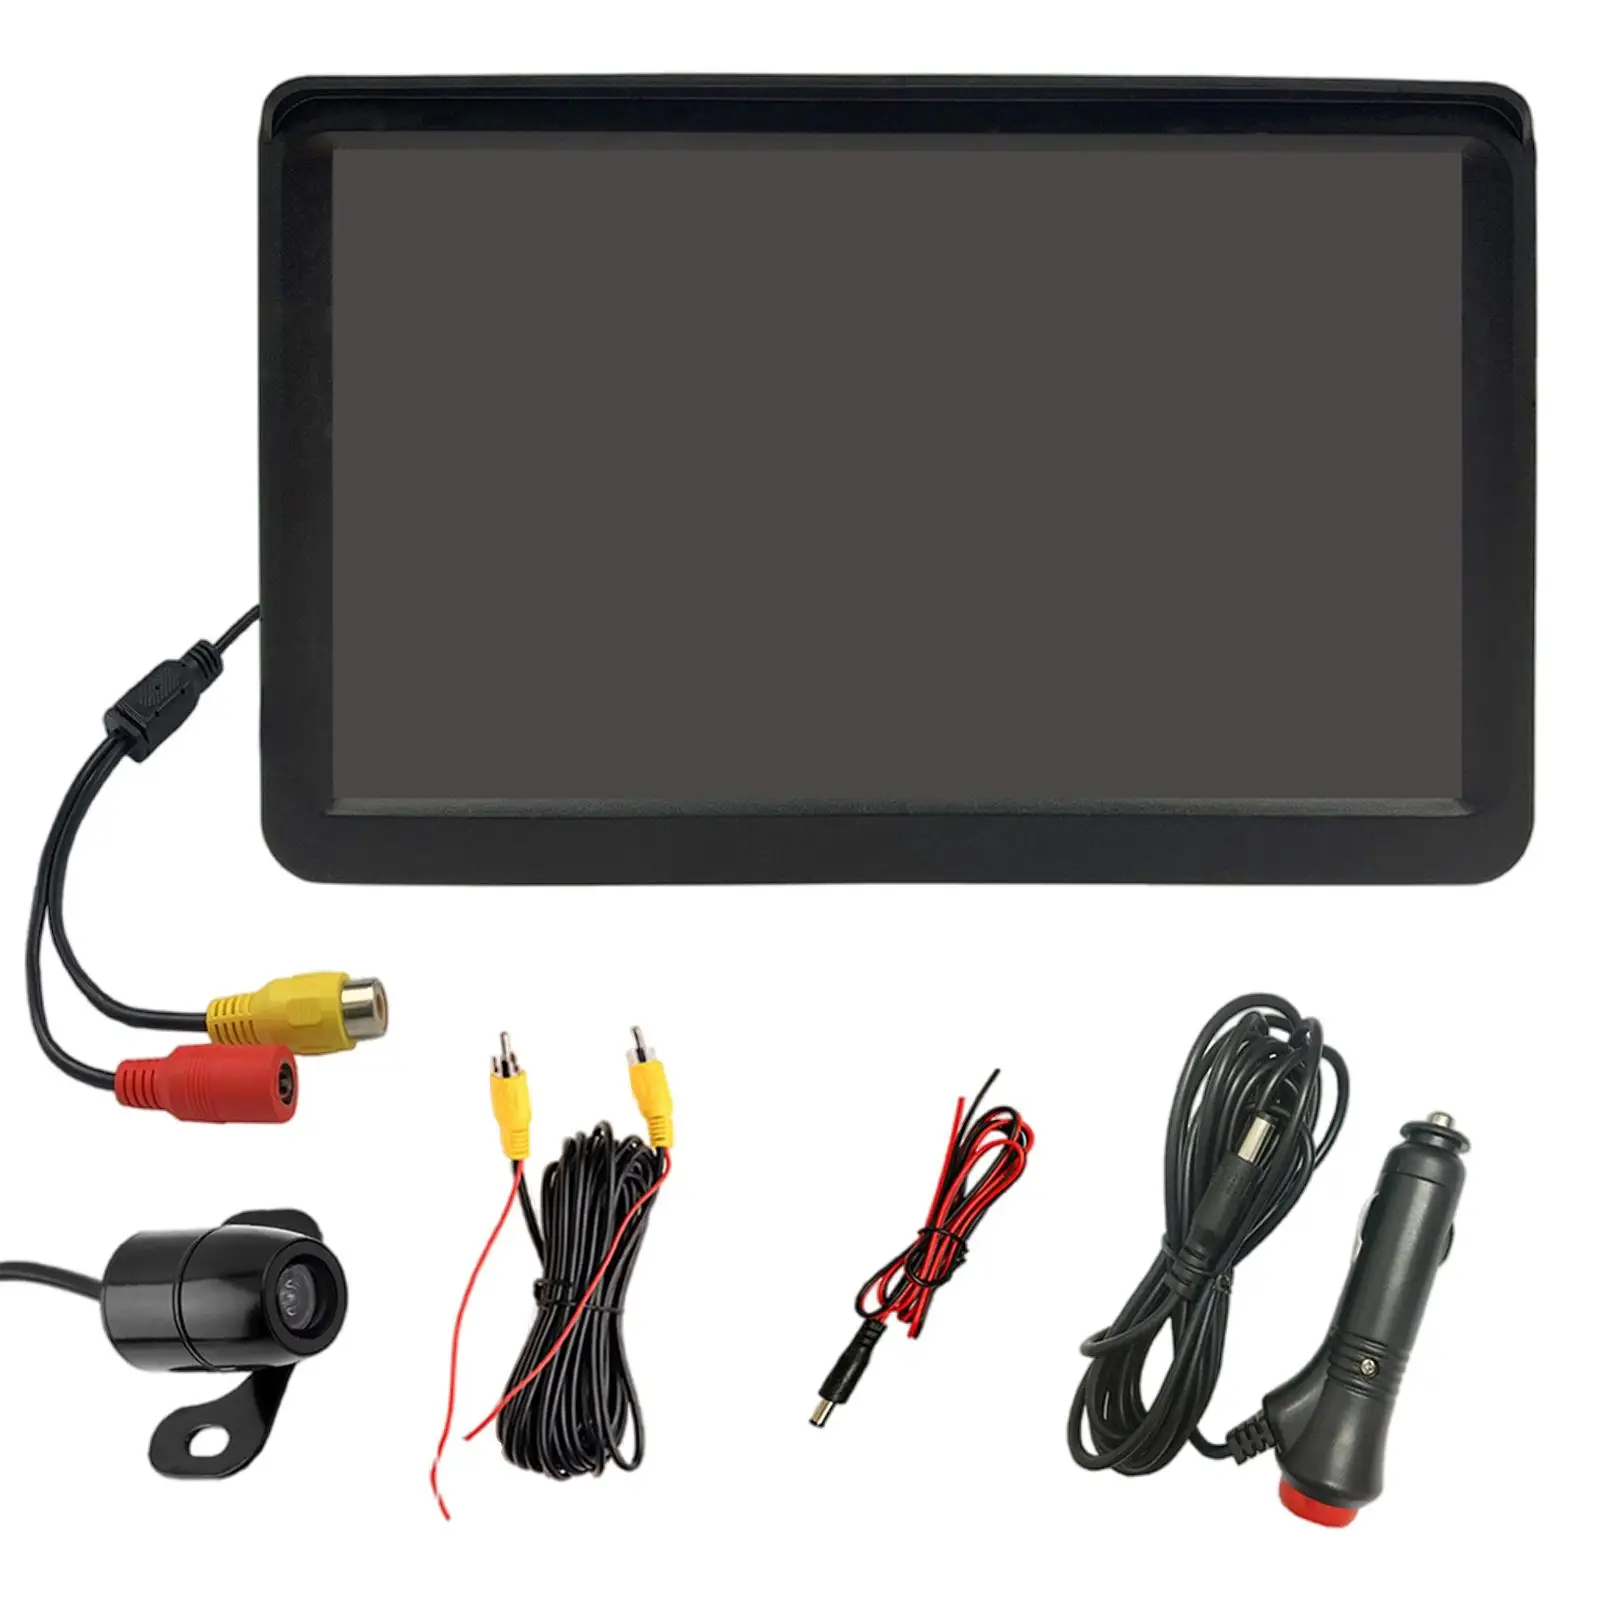  Car Monitor, LCD 7 inch 170° Wide Angle Scale Lines, Waterproof Lens, 12V , for Parking, Truck, Vehicles, SUV